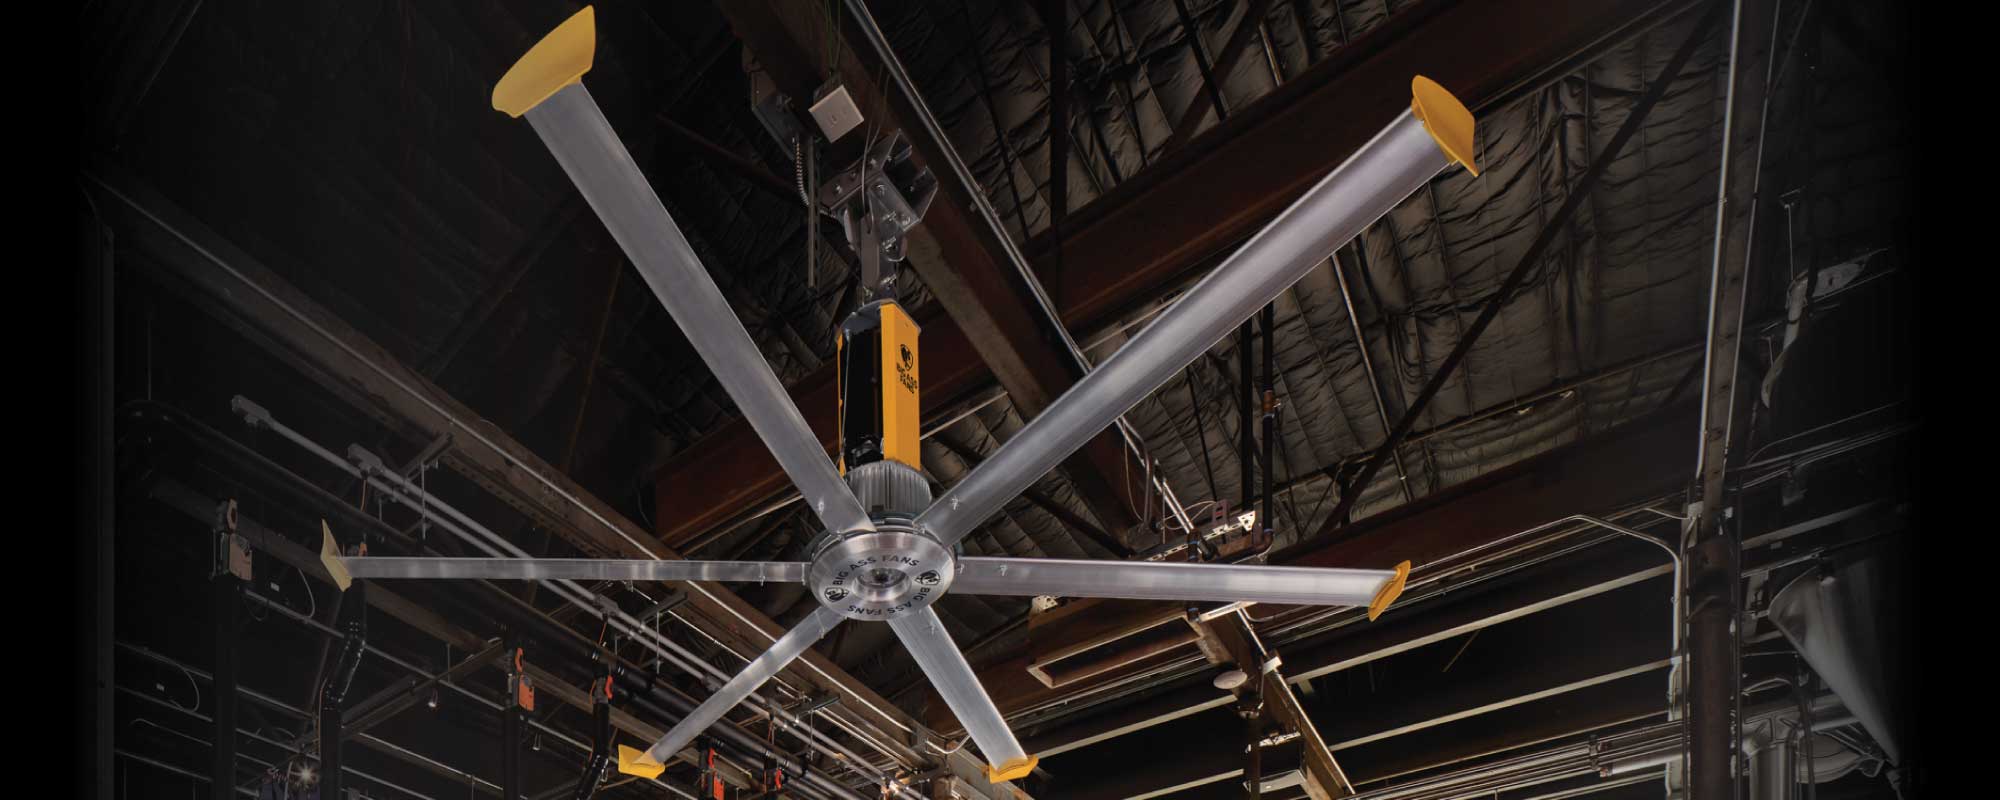 when to use hvls ceiling fans